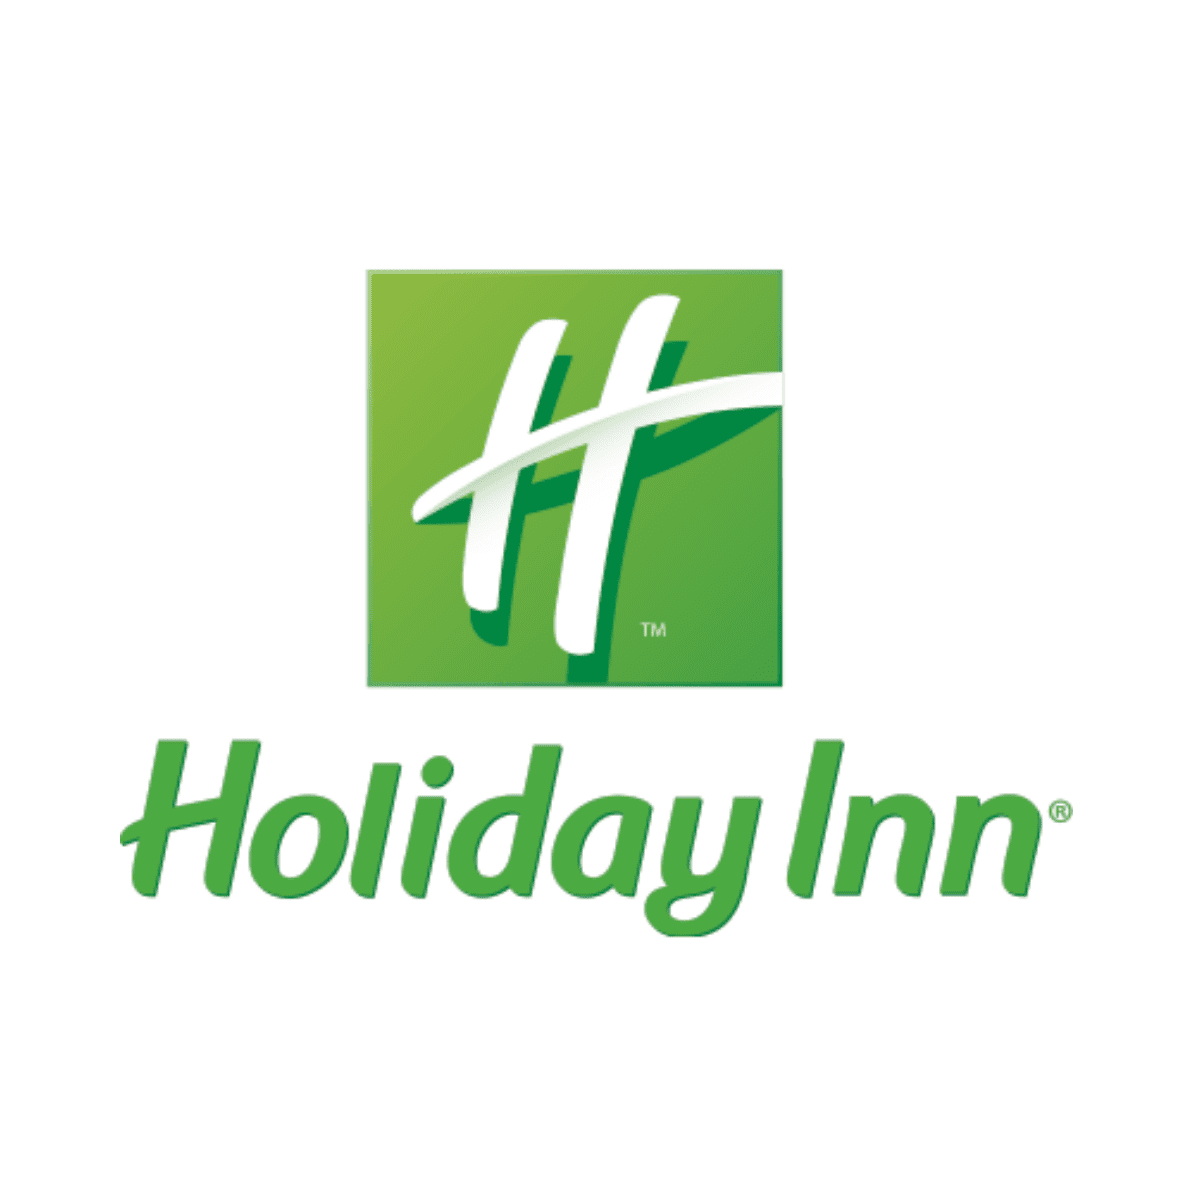 Hotel paint bedrooms bathrooms fast and esay application, Installation of CorsoFacilty for Holiday Inn hotels